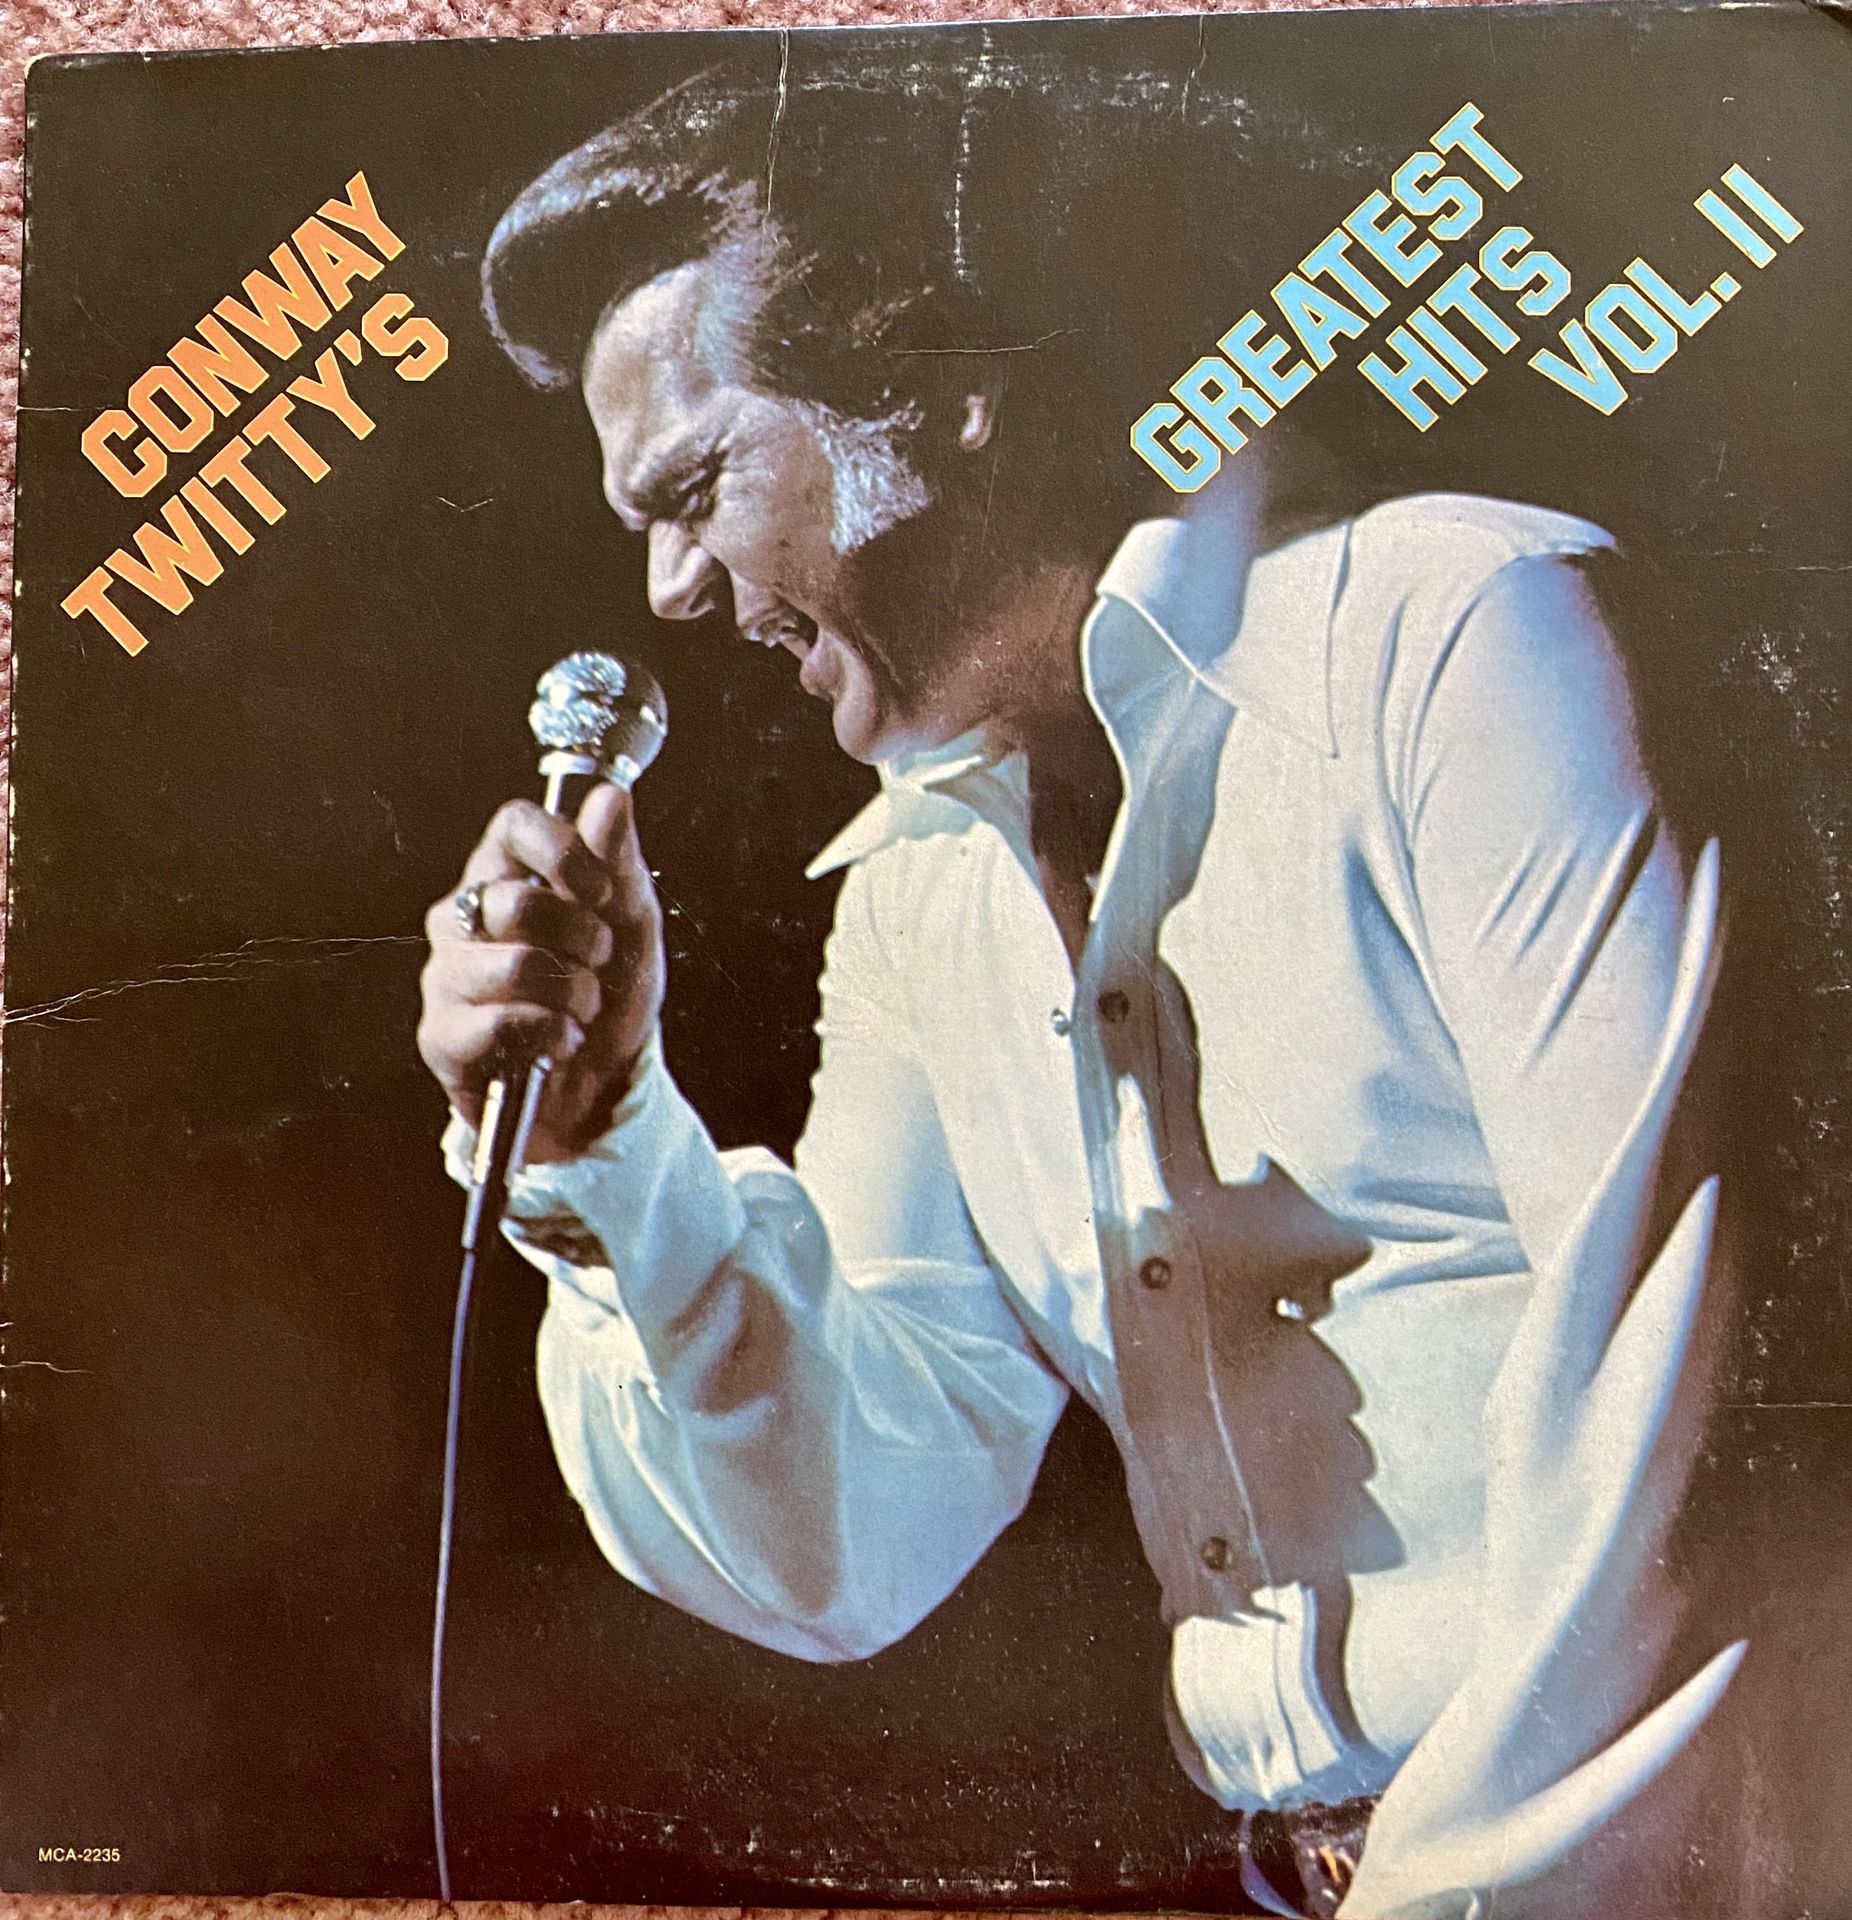 Conway Twitty “Greatest Hits Vol II” $12.05